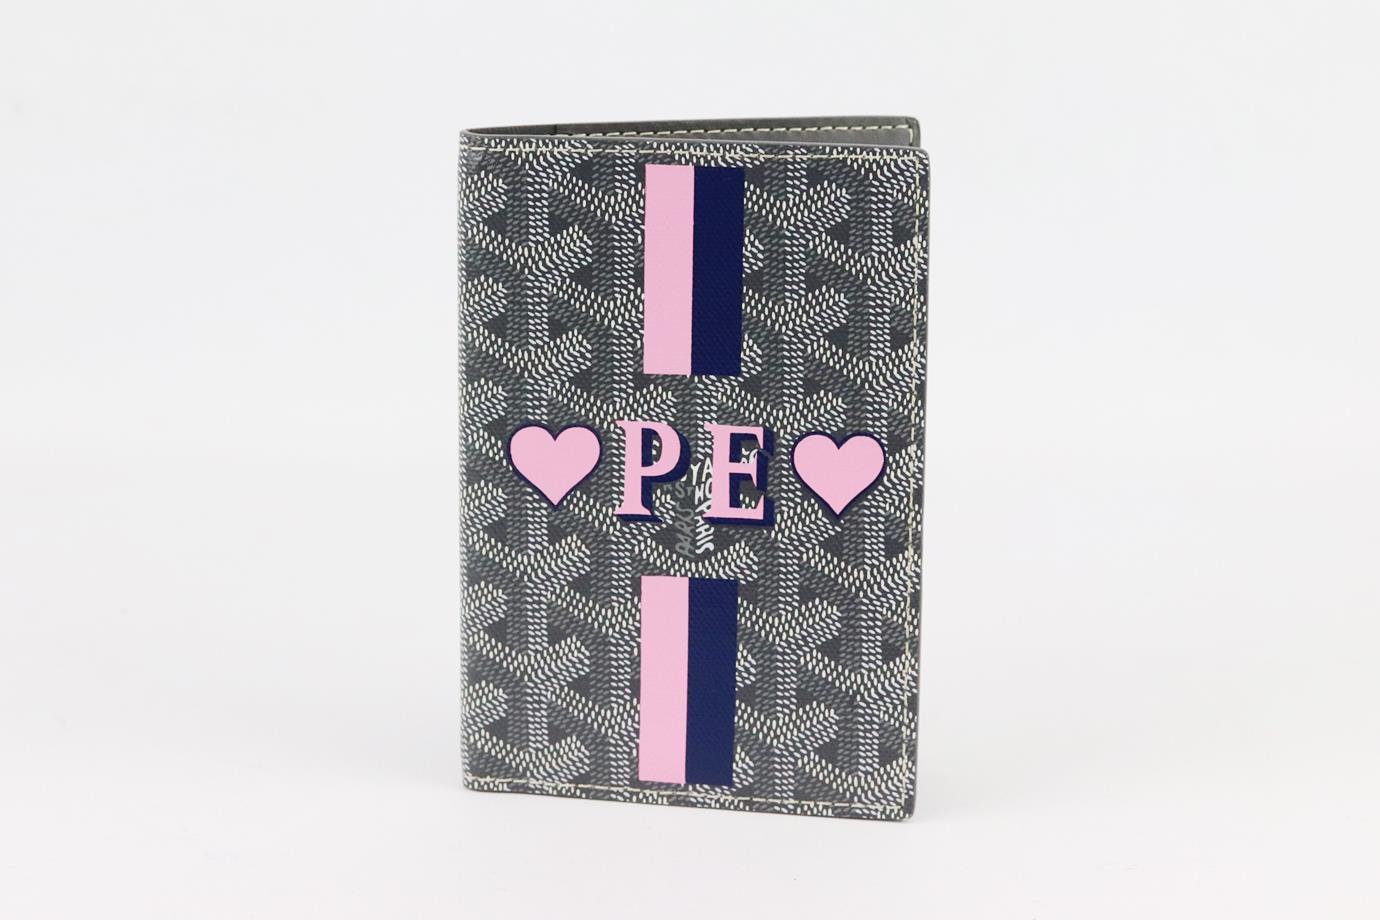 Goyard Grenelle personalised coated canvas and leather passport holder. Made tonal-grey and white printed coated-canvas with a navy and light-pink personlisation, opening to a smooth grey leather interior with 4 card slots. Grey, white, pink and